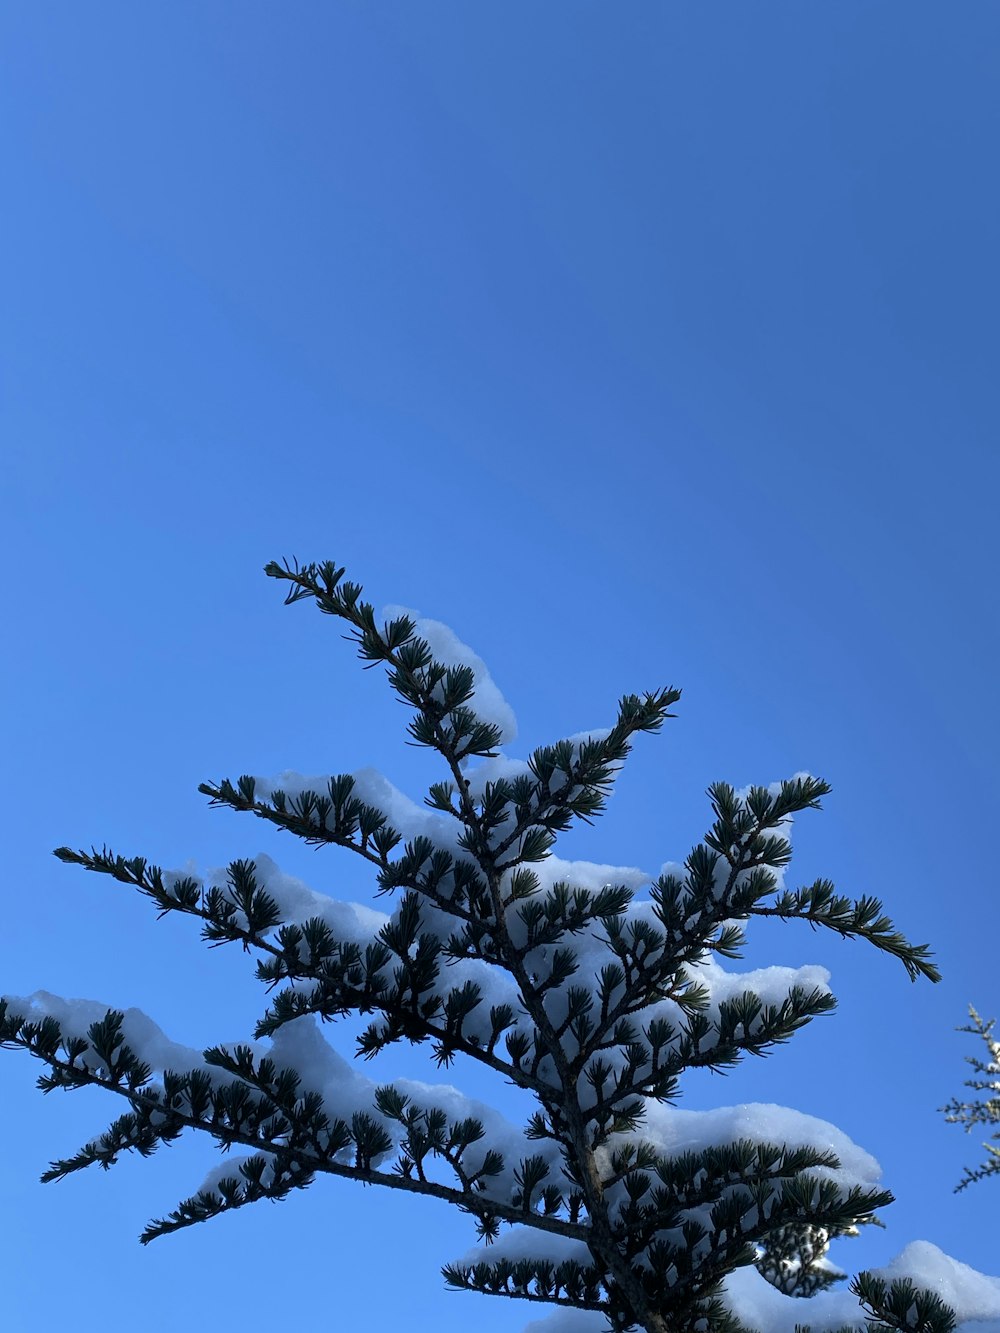 snow covered tree under blue sky during daytime